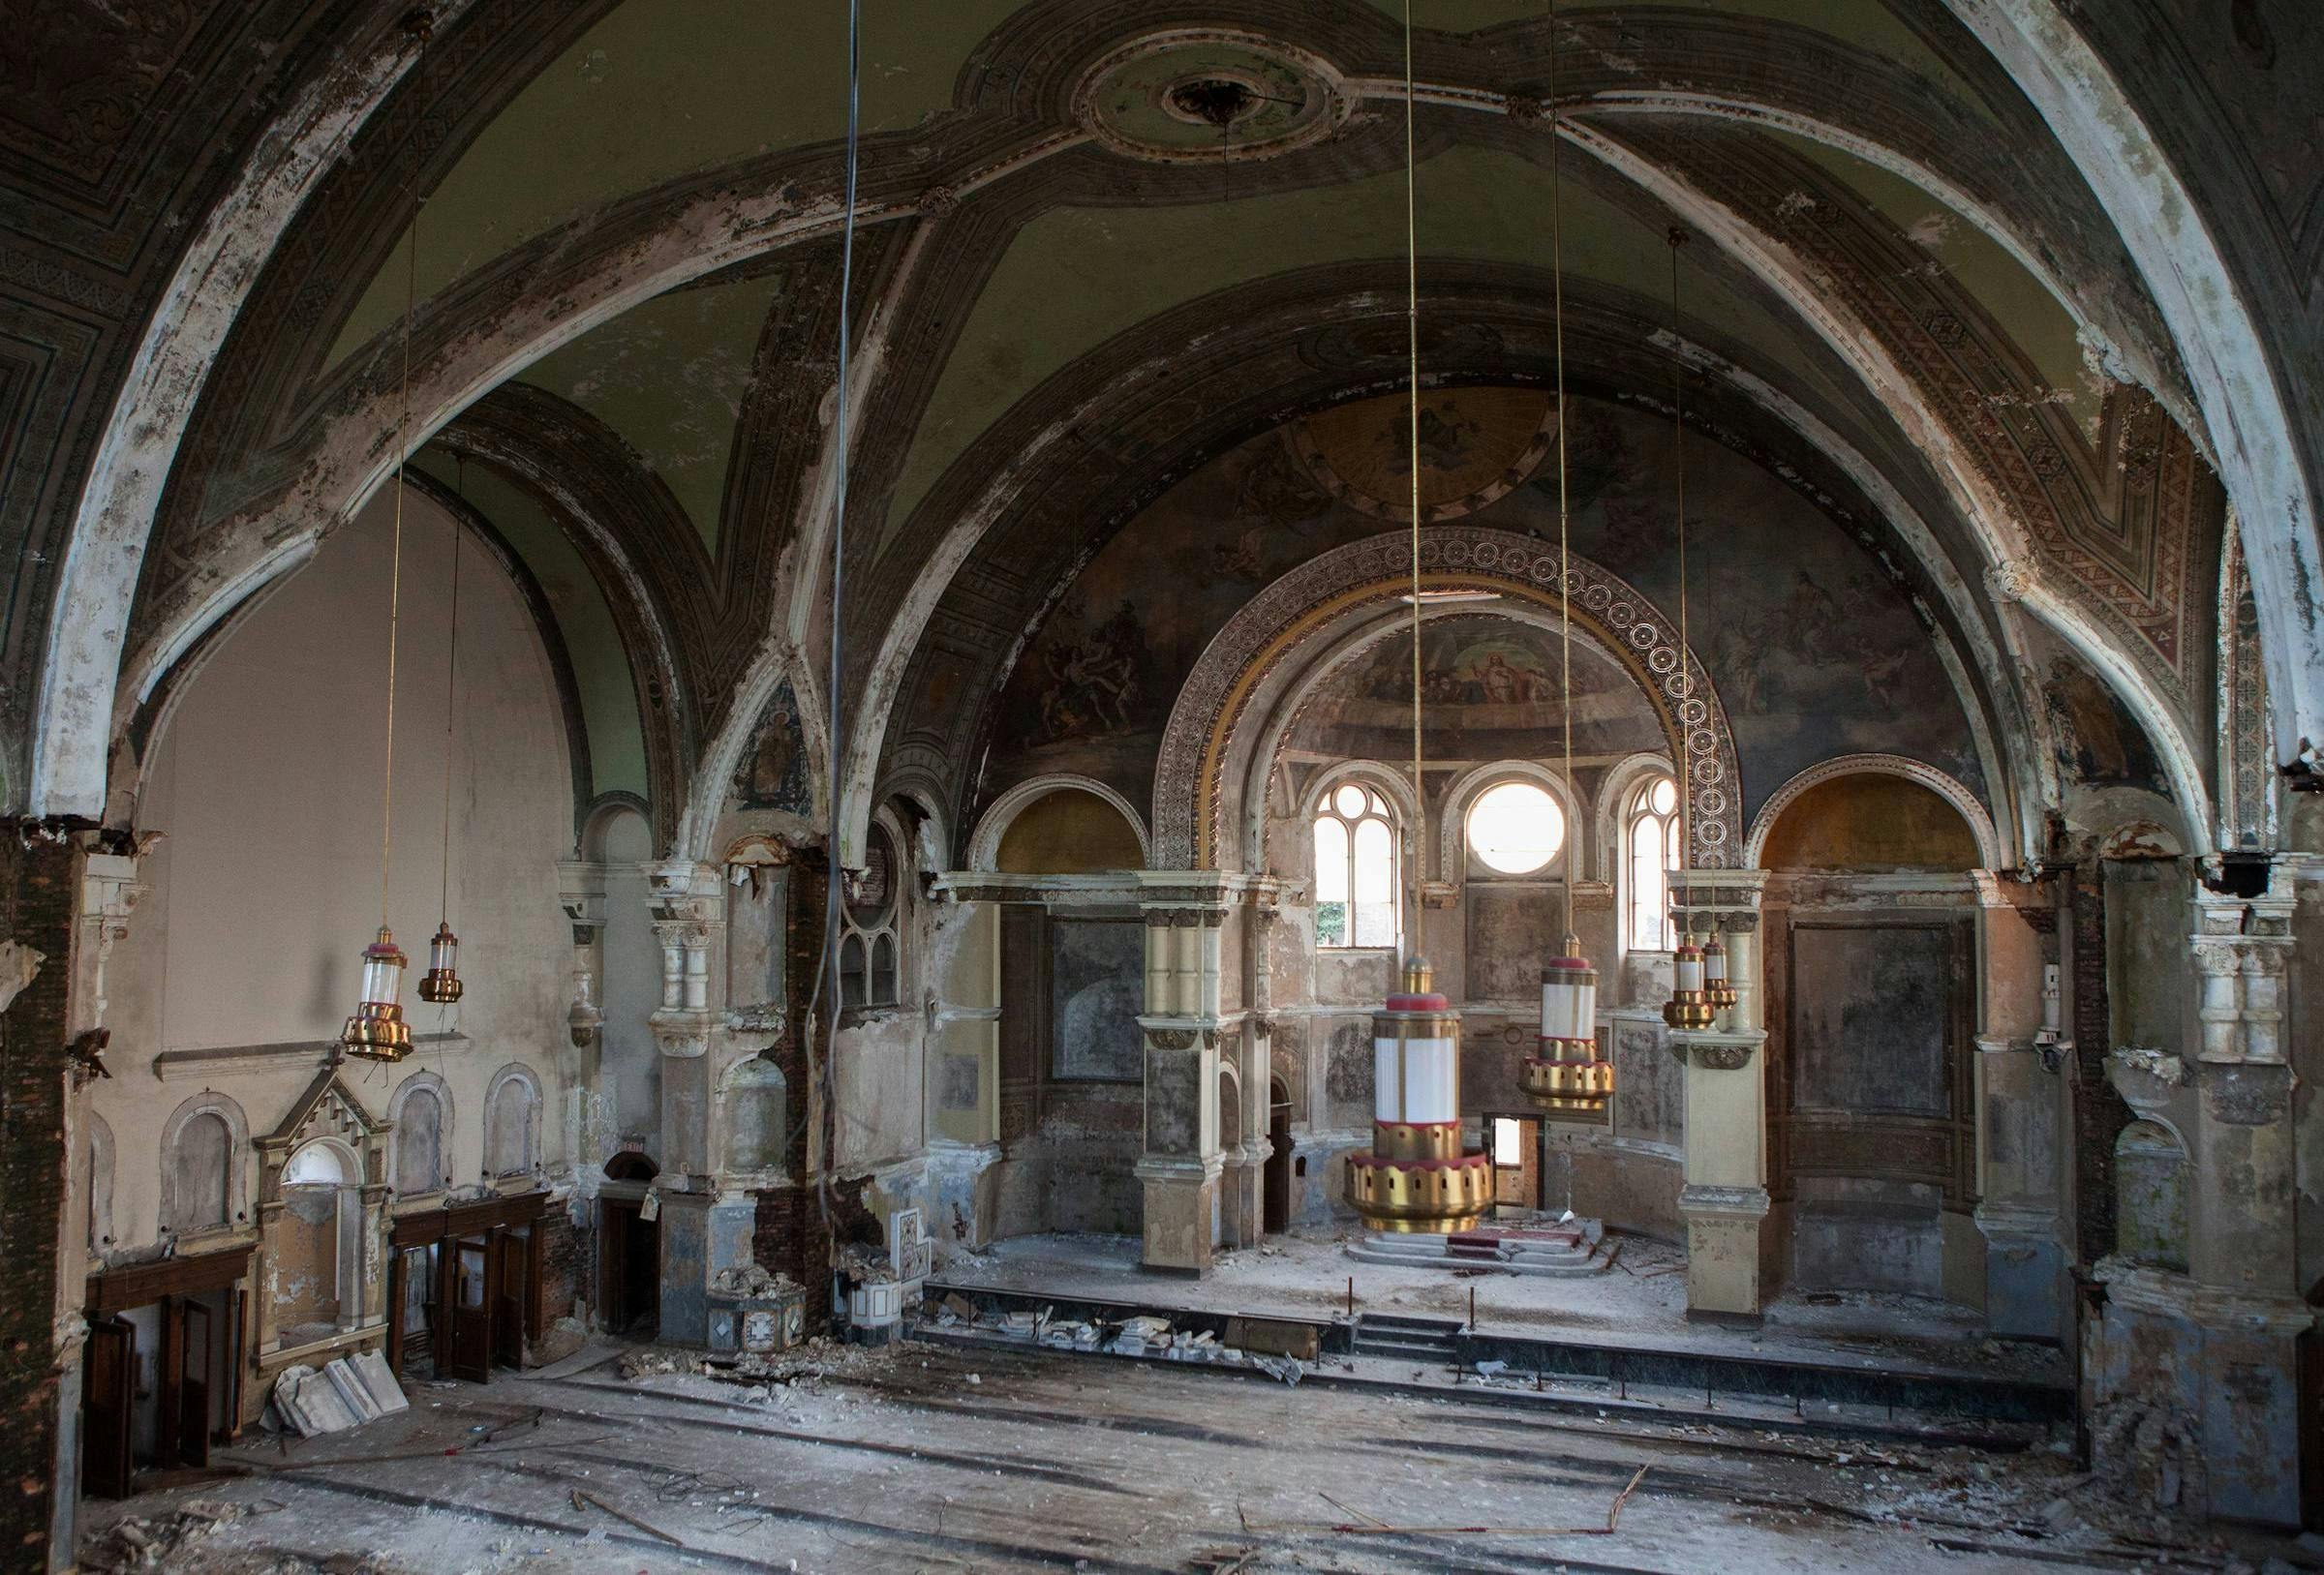 An image of the now-demolished Roman Catholic Church of St. Laurence on Chicago's South Side. The image is taken from the inside of the building looking out